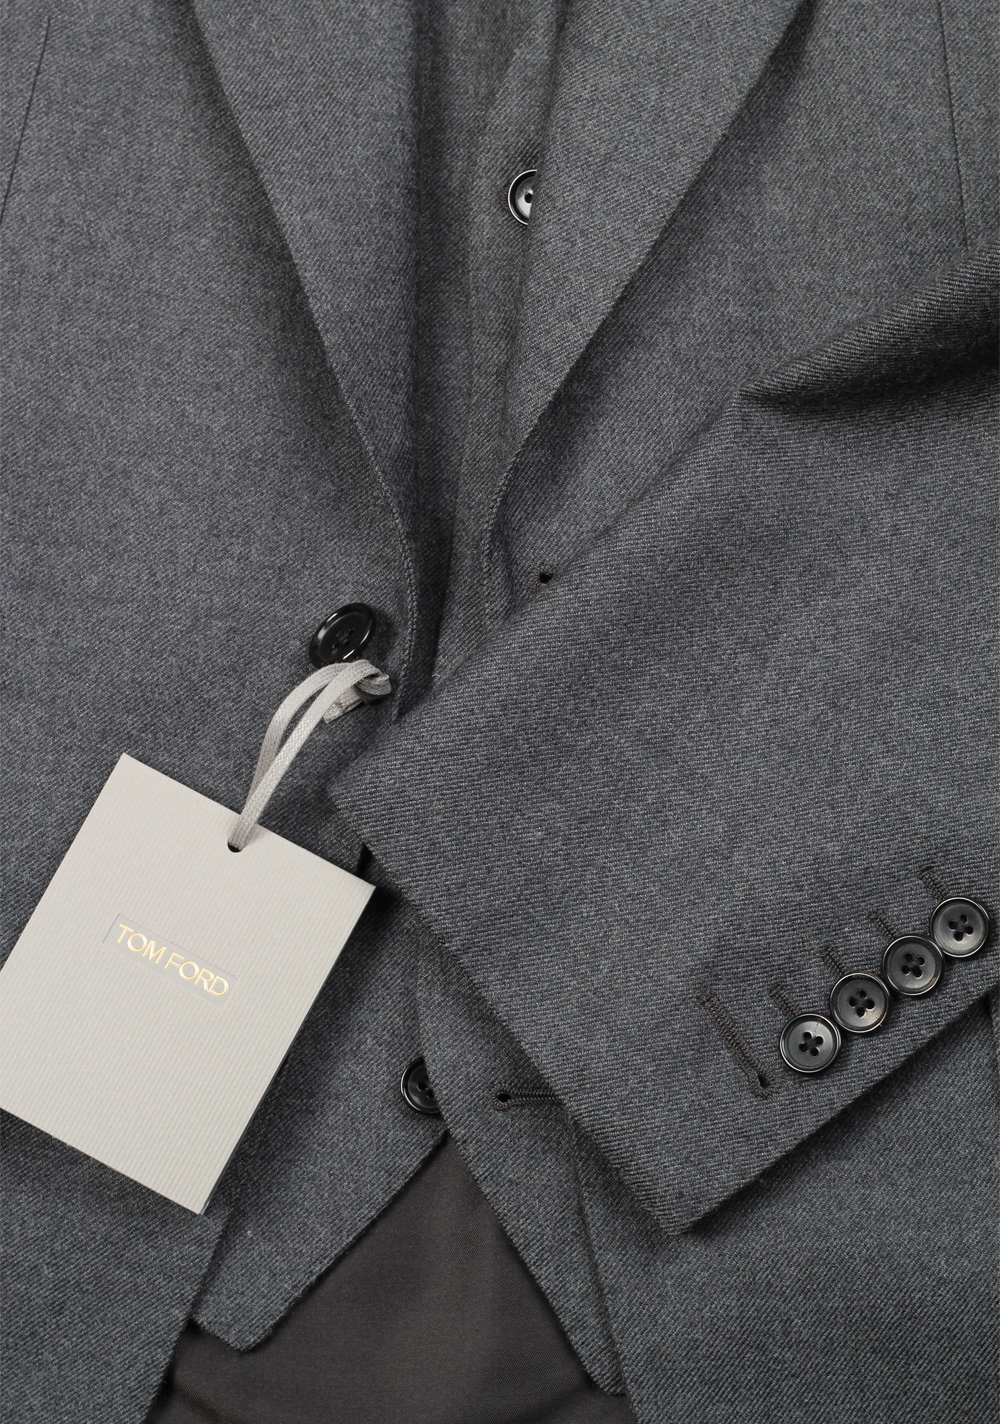 TOM FORD Shelton Solid Gray 3 Piece Suit Size 46 / 36R U.S. Wool | Costume Limité